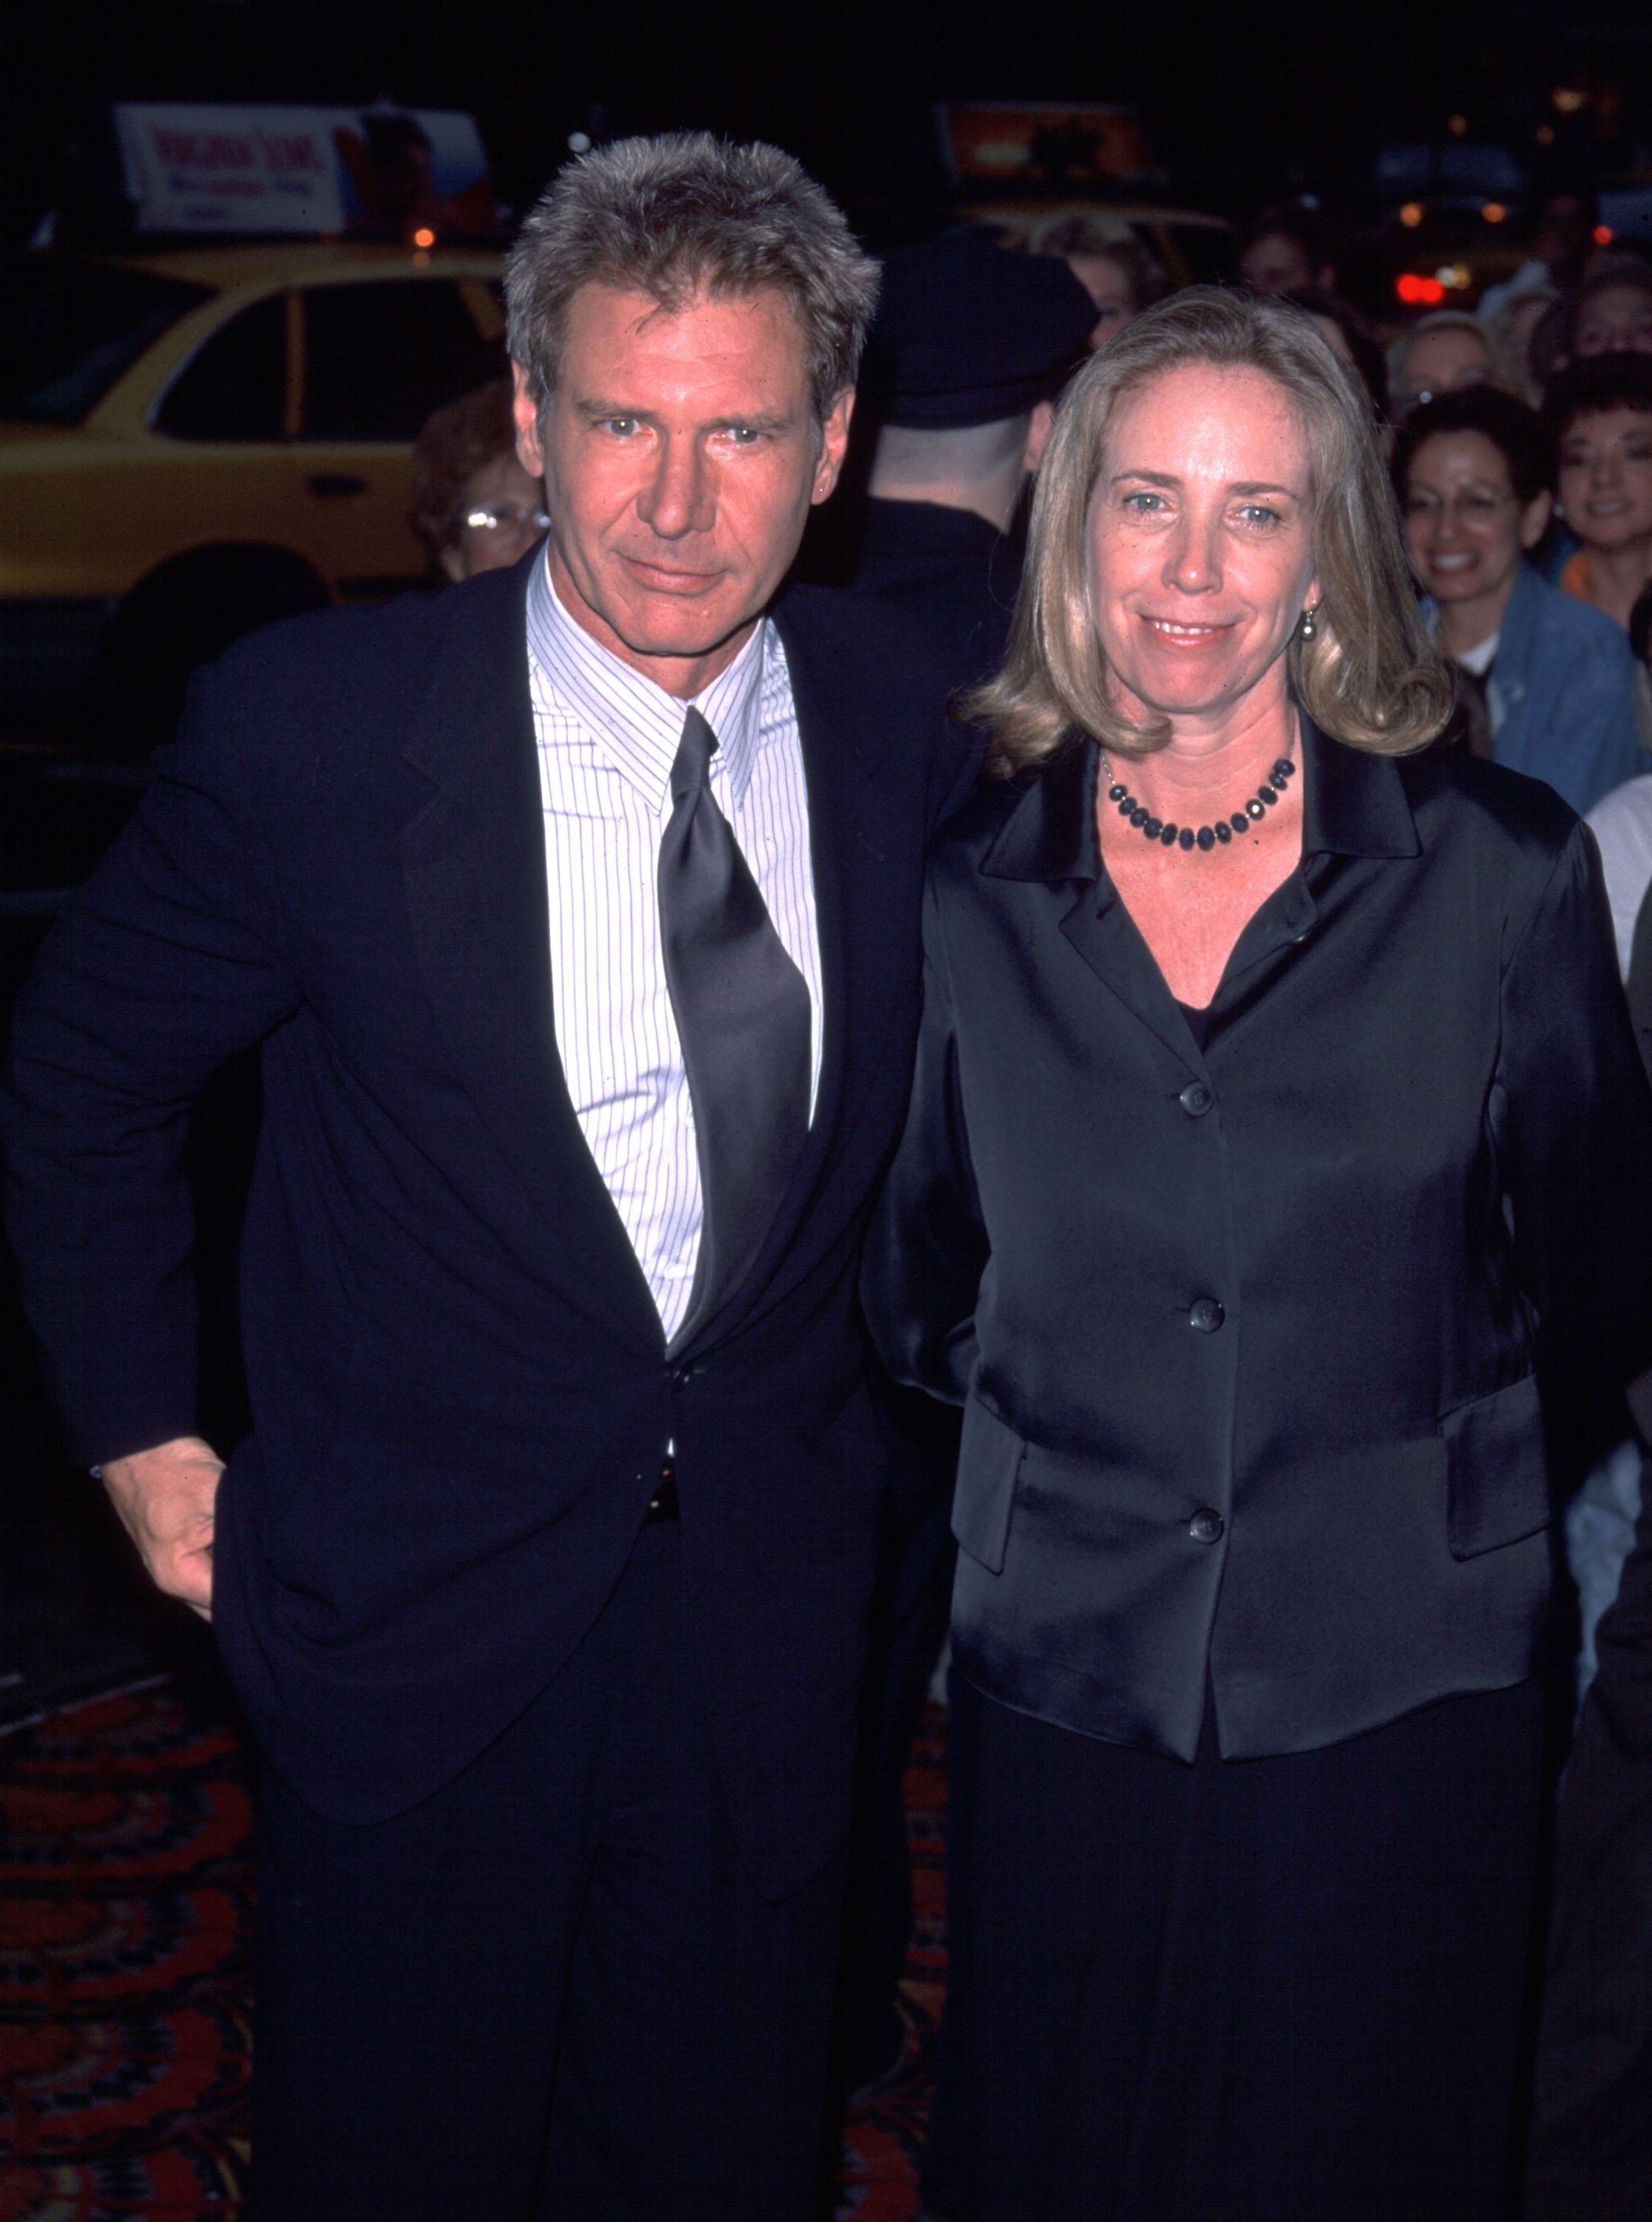 Harrison Ford and his second wife, Melissa Mathison, at a benefit screening of "Six Days and Seven Nights" on June 11, 1998, in New York City | Source: Getty Images